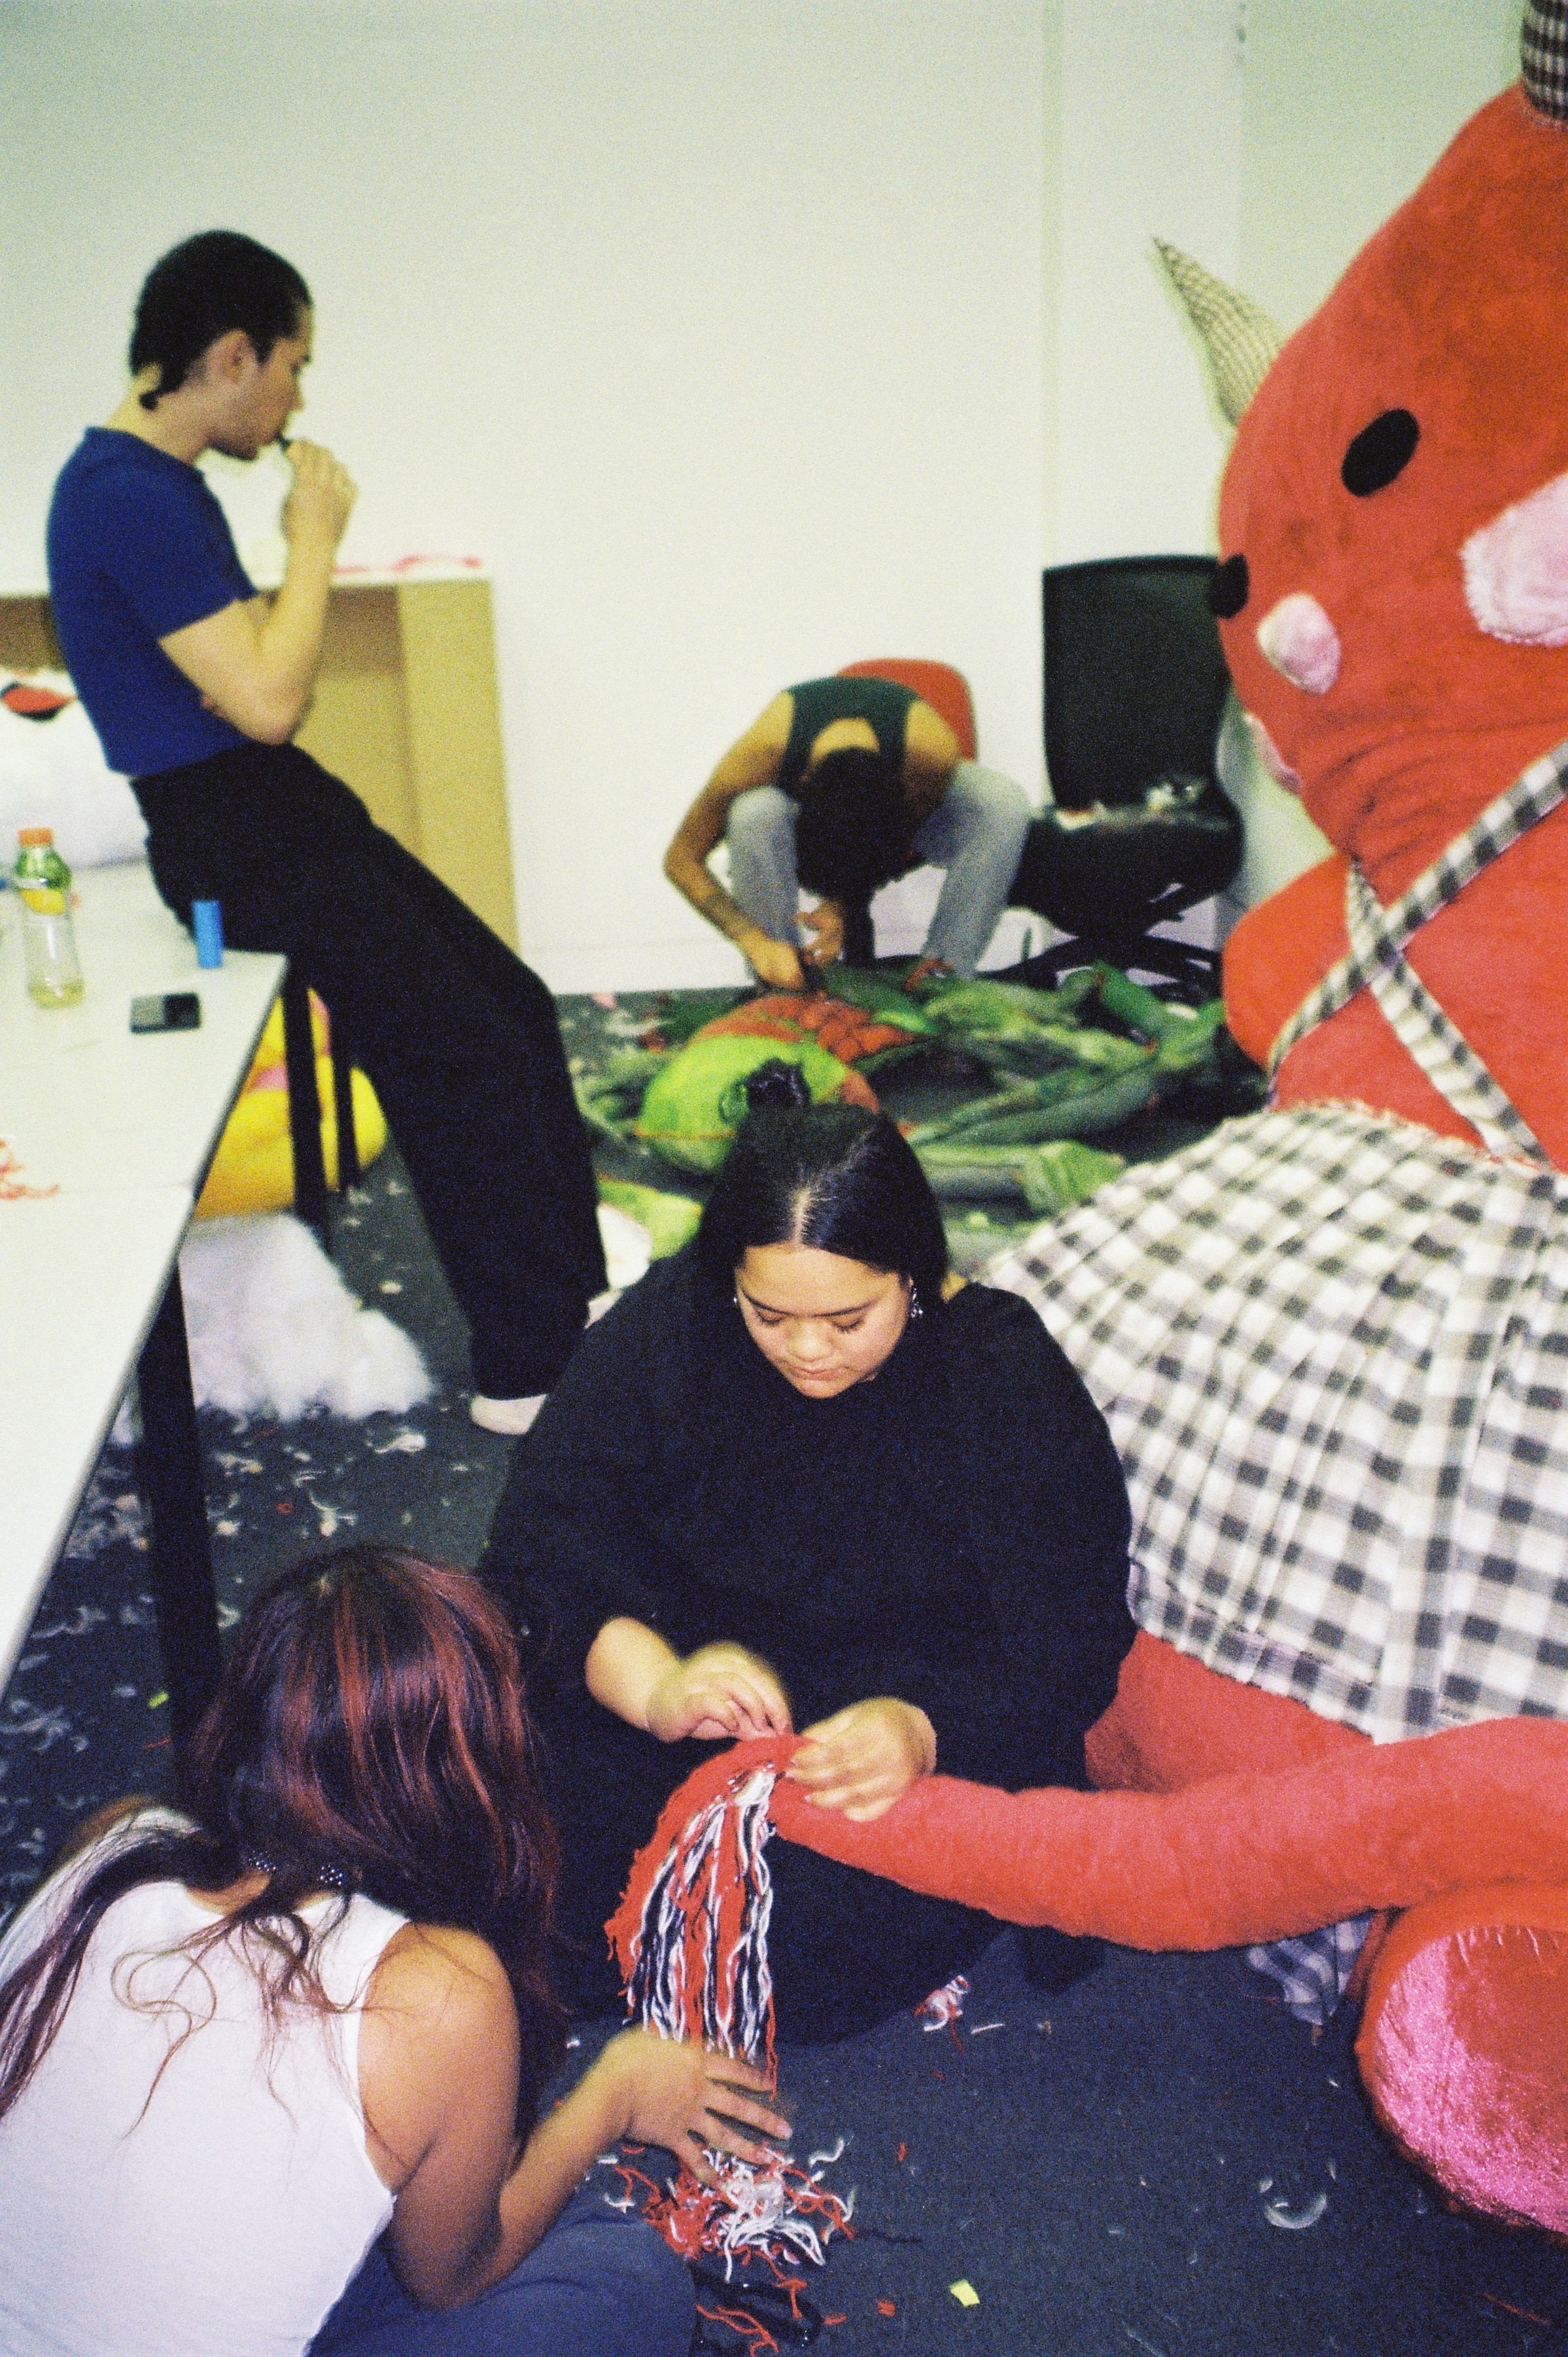 A group of people sewing in a room